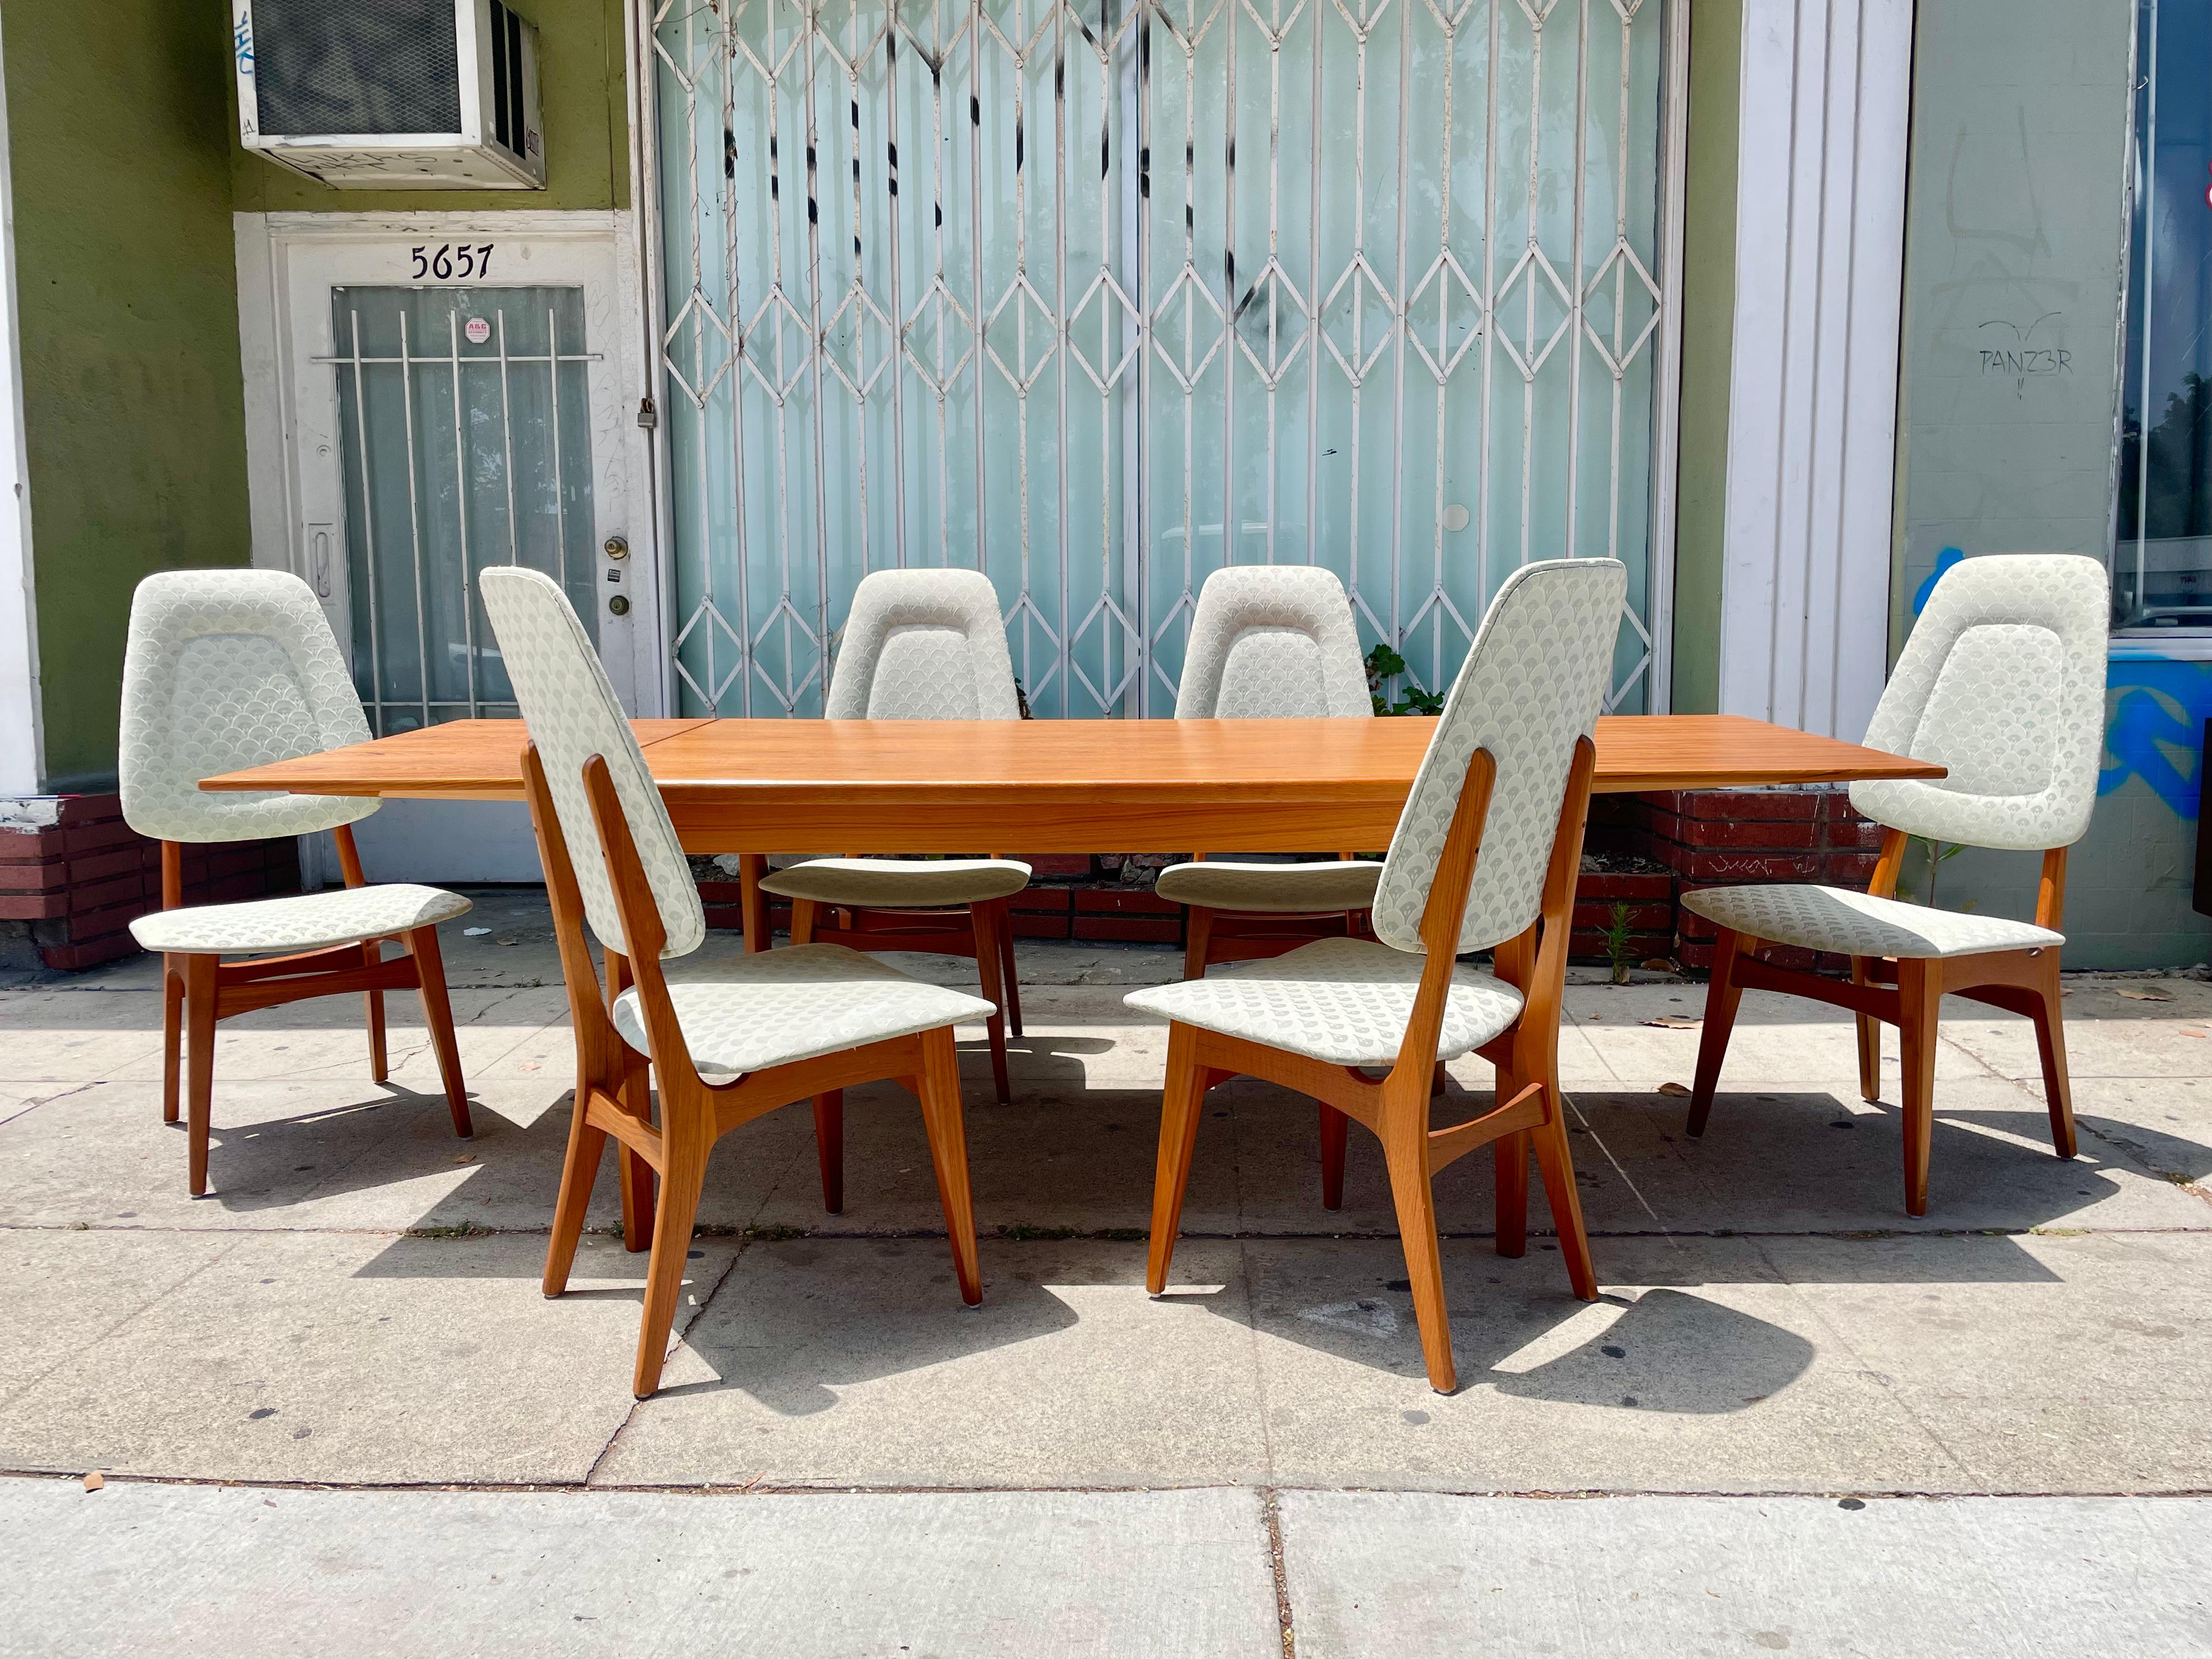 Danish modern extending teak dining set from Denmark, circa 1950s. This vintage dining table is built with the highest quality teak wood, where the aesthetic grains of teak stand out along the top and its extensions. If you want to expand the dining